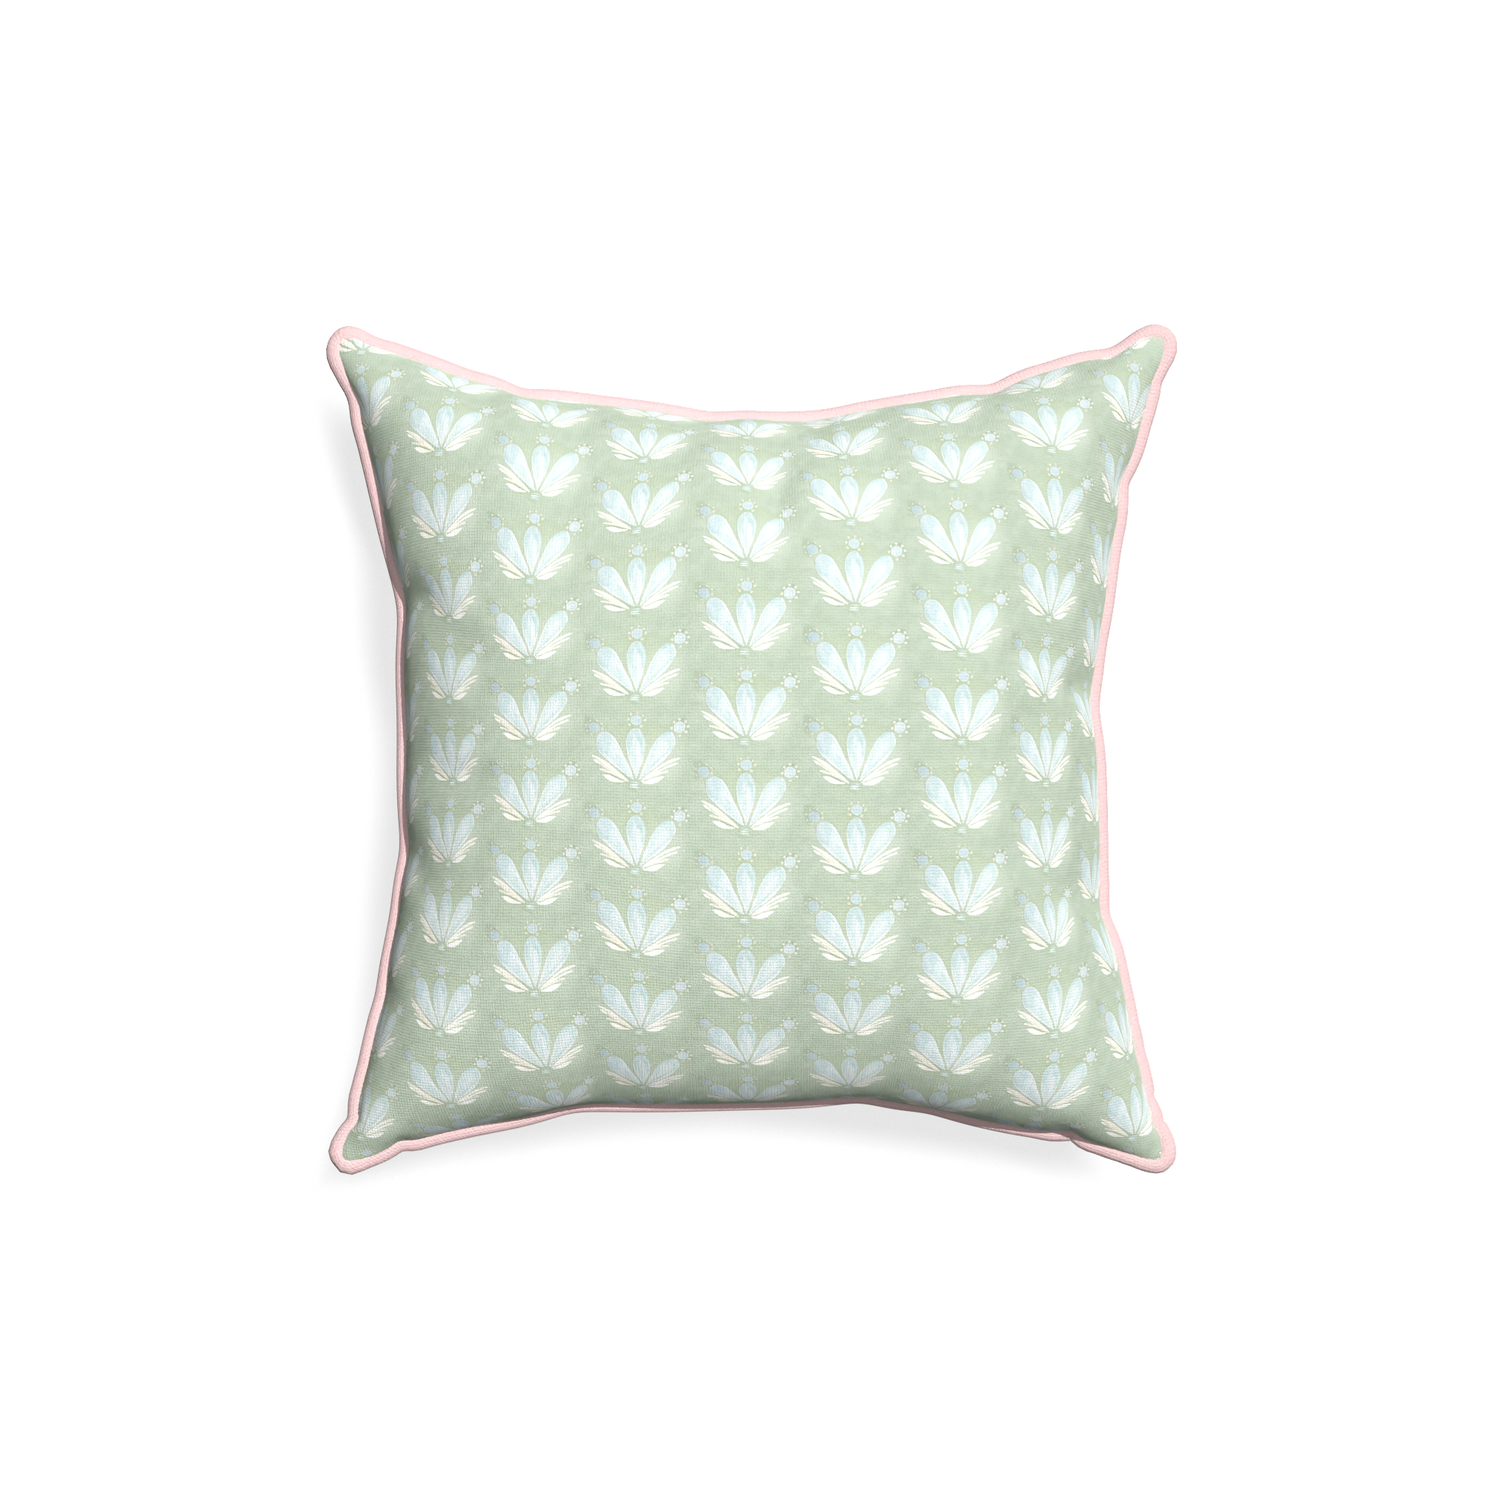 18-square serena sea salt custom blue & green floral drop repeatpillow with petal piping on white background